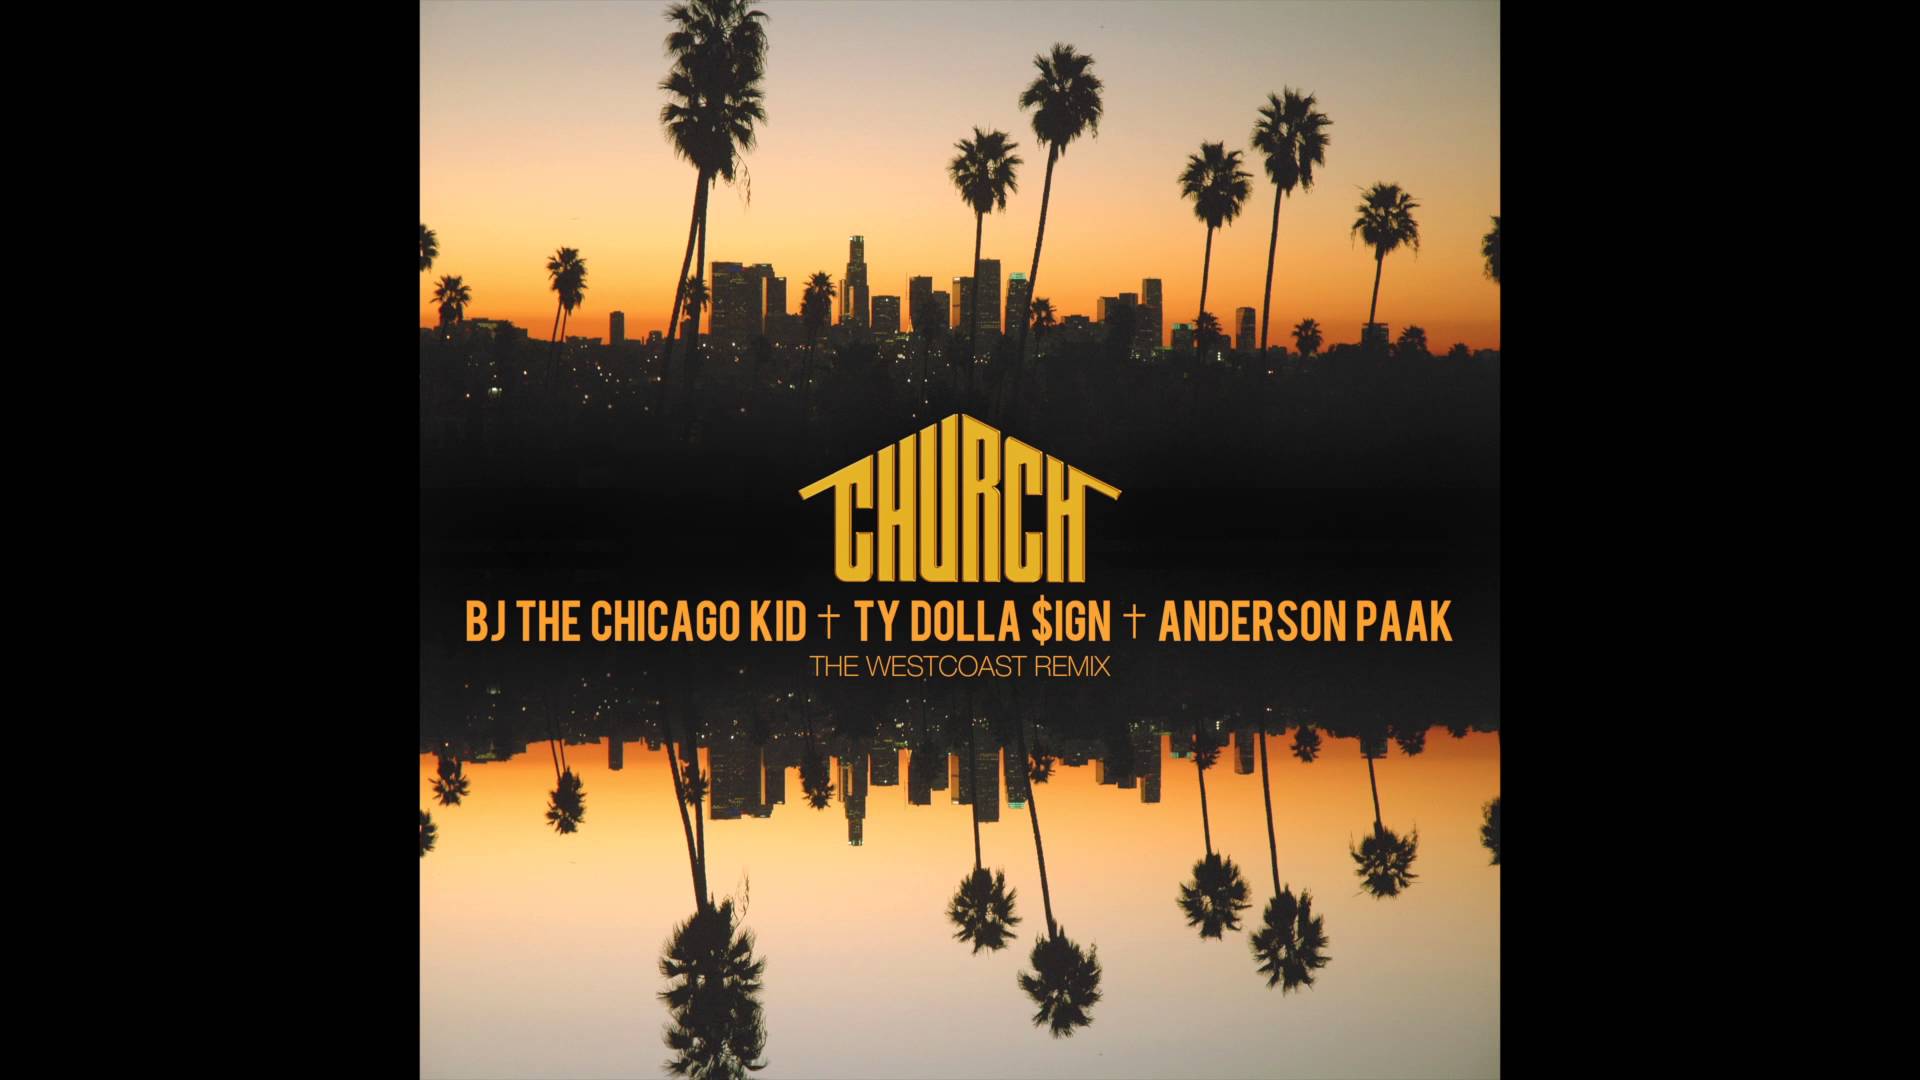 BJ The Chicago Kid ft. Ty Dolla $ign & Anderson .Paak – “Church” (West Coast Remix) (Audio)